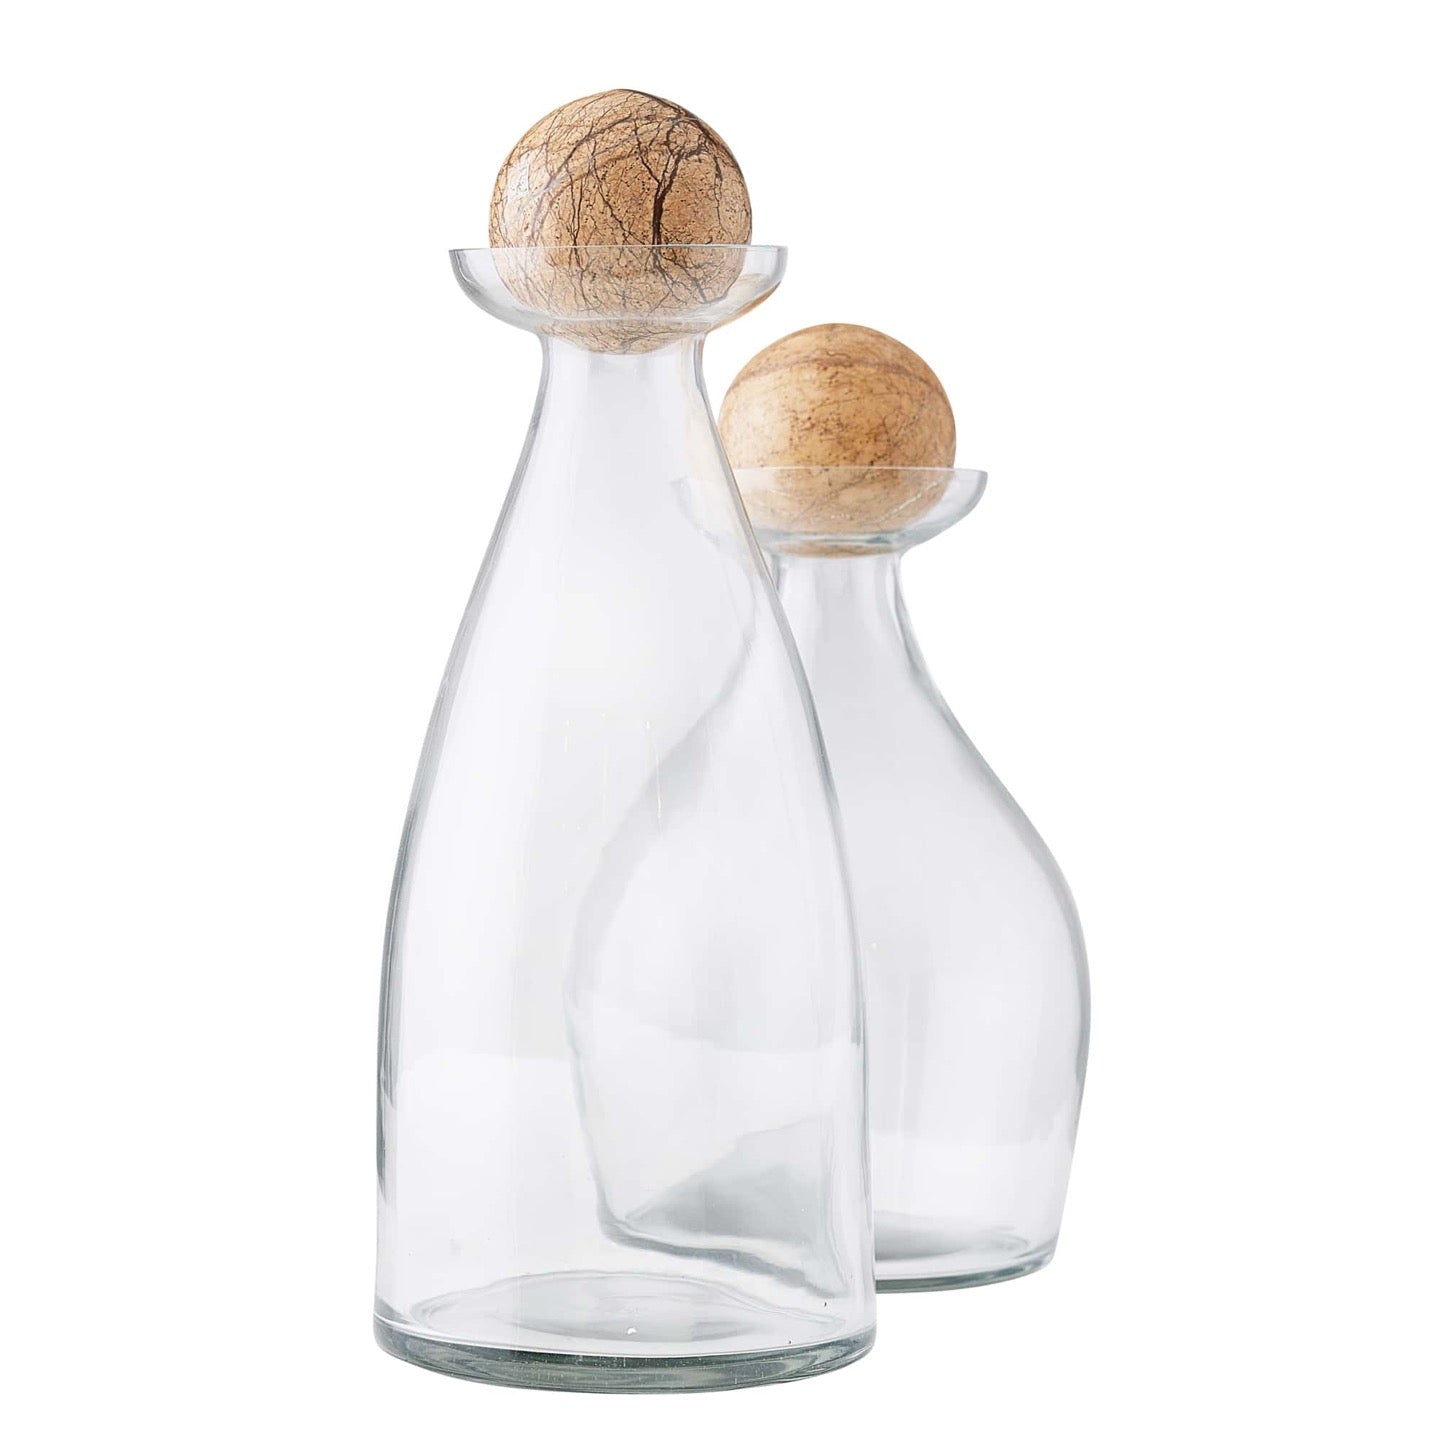 Thayer Decanters, Set of 2